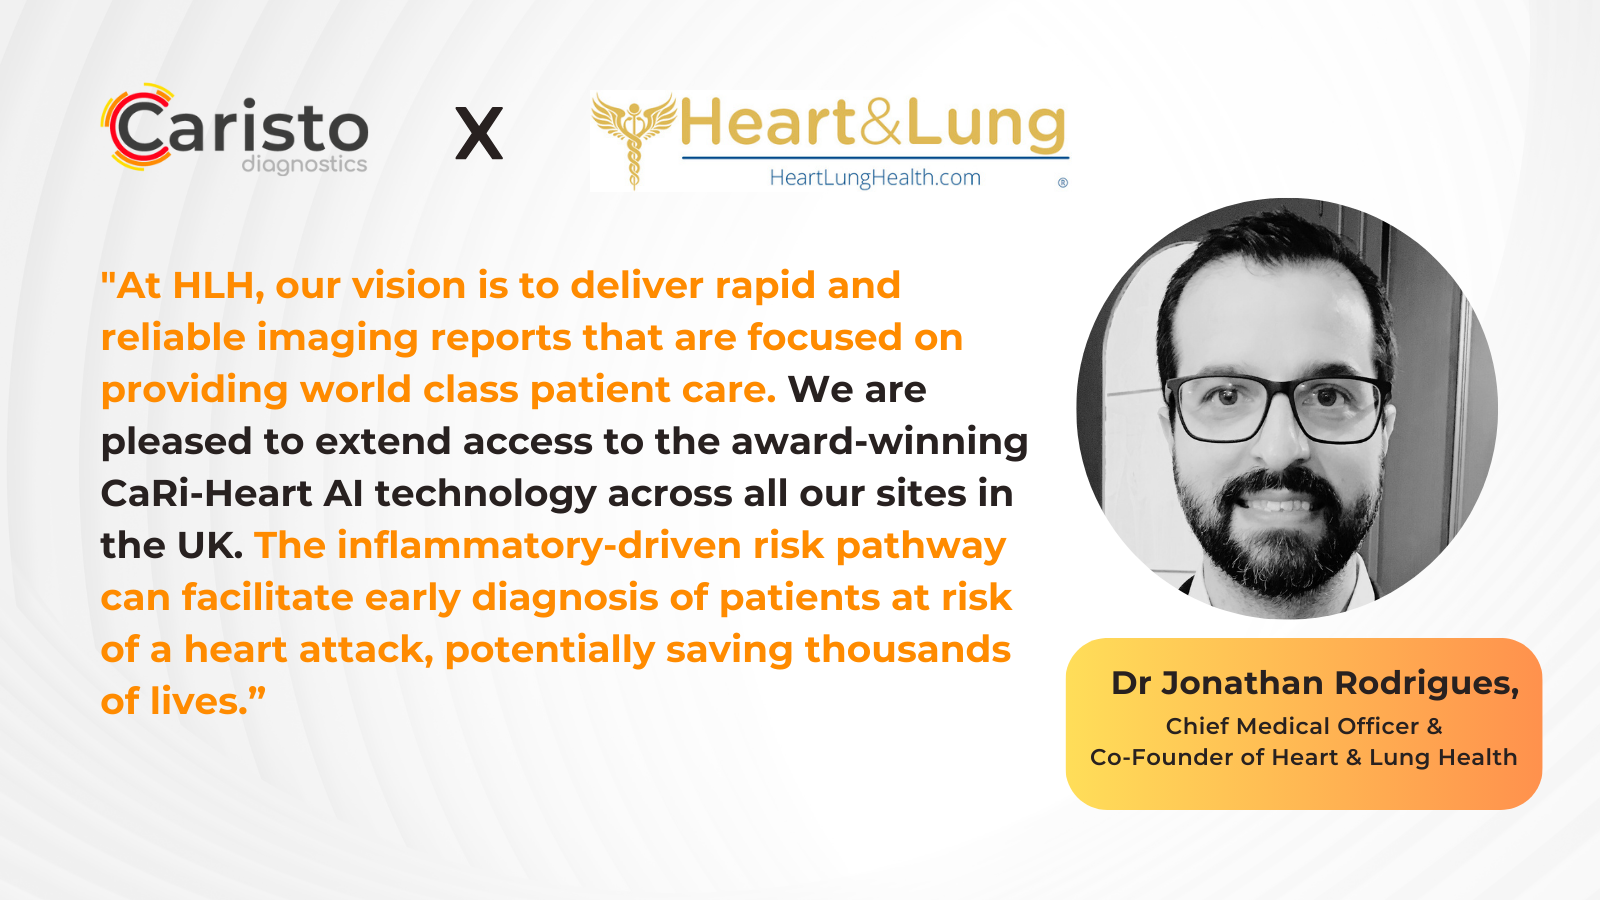 Quote by Dr Jonathan Rodrigues, Heart & Lung Health